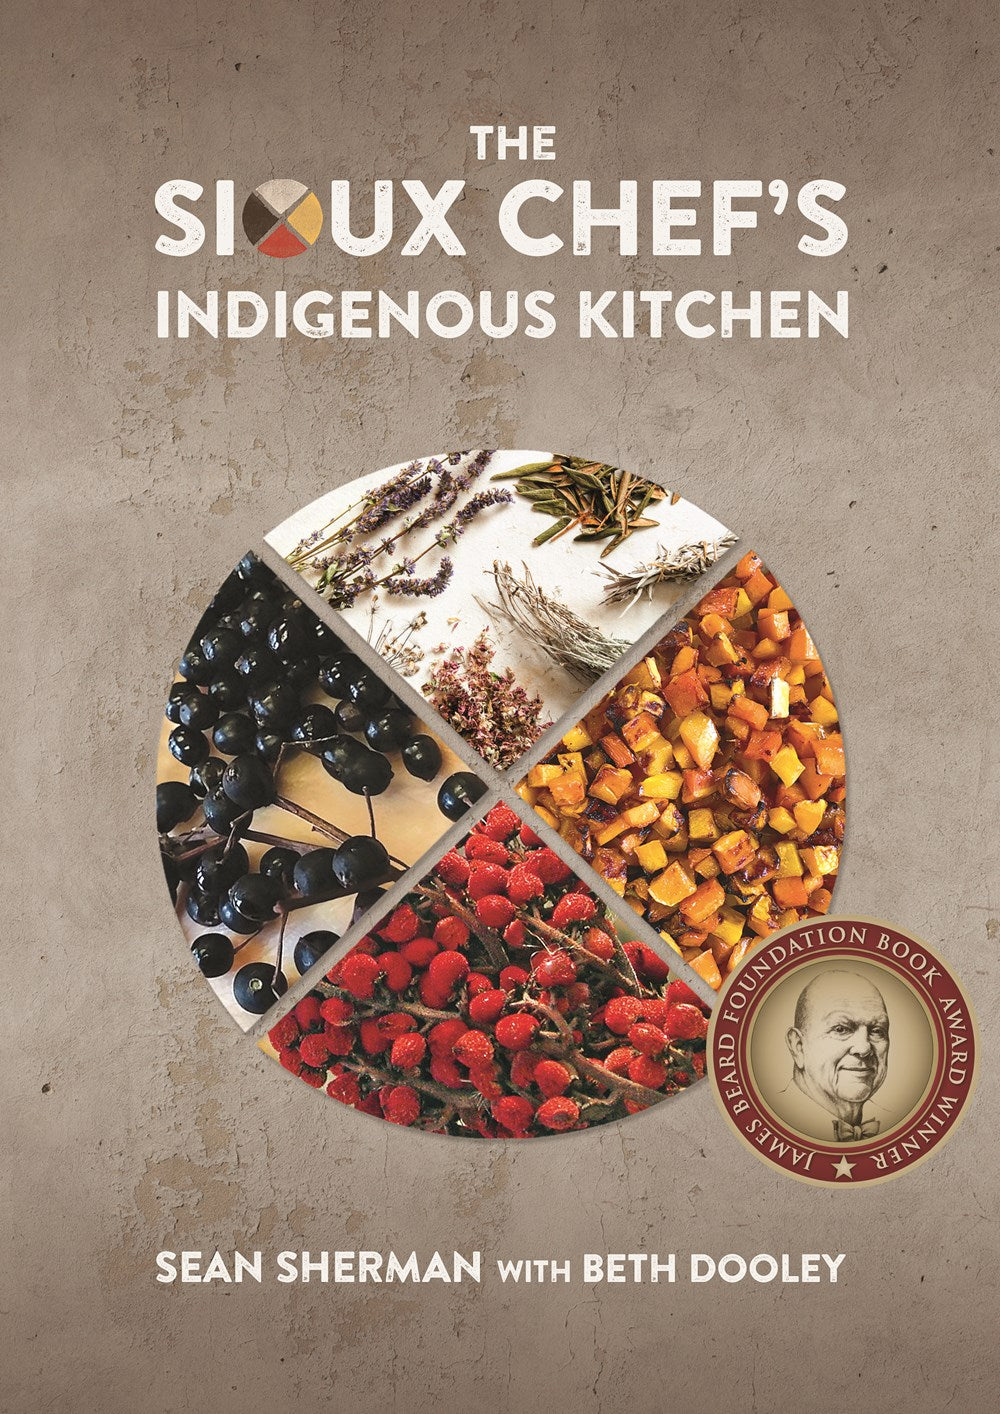 The Sioux Chef's Indigenous Kitchen by Sean Sherman